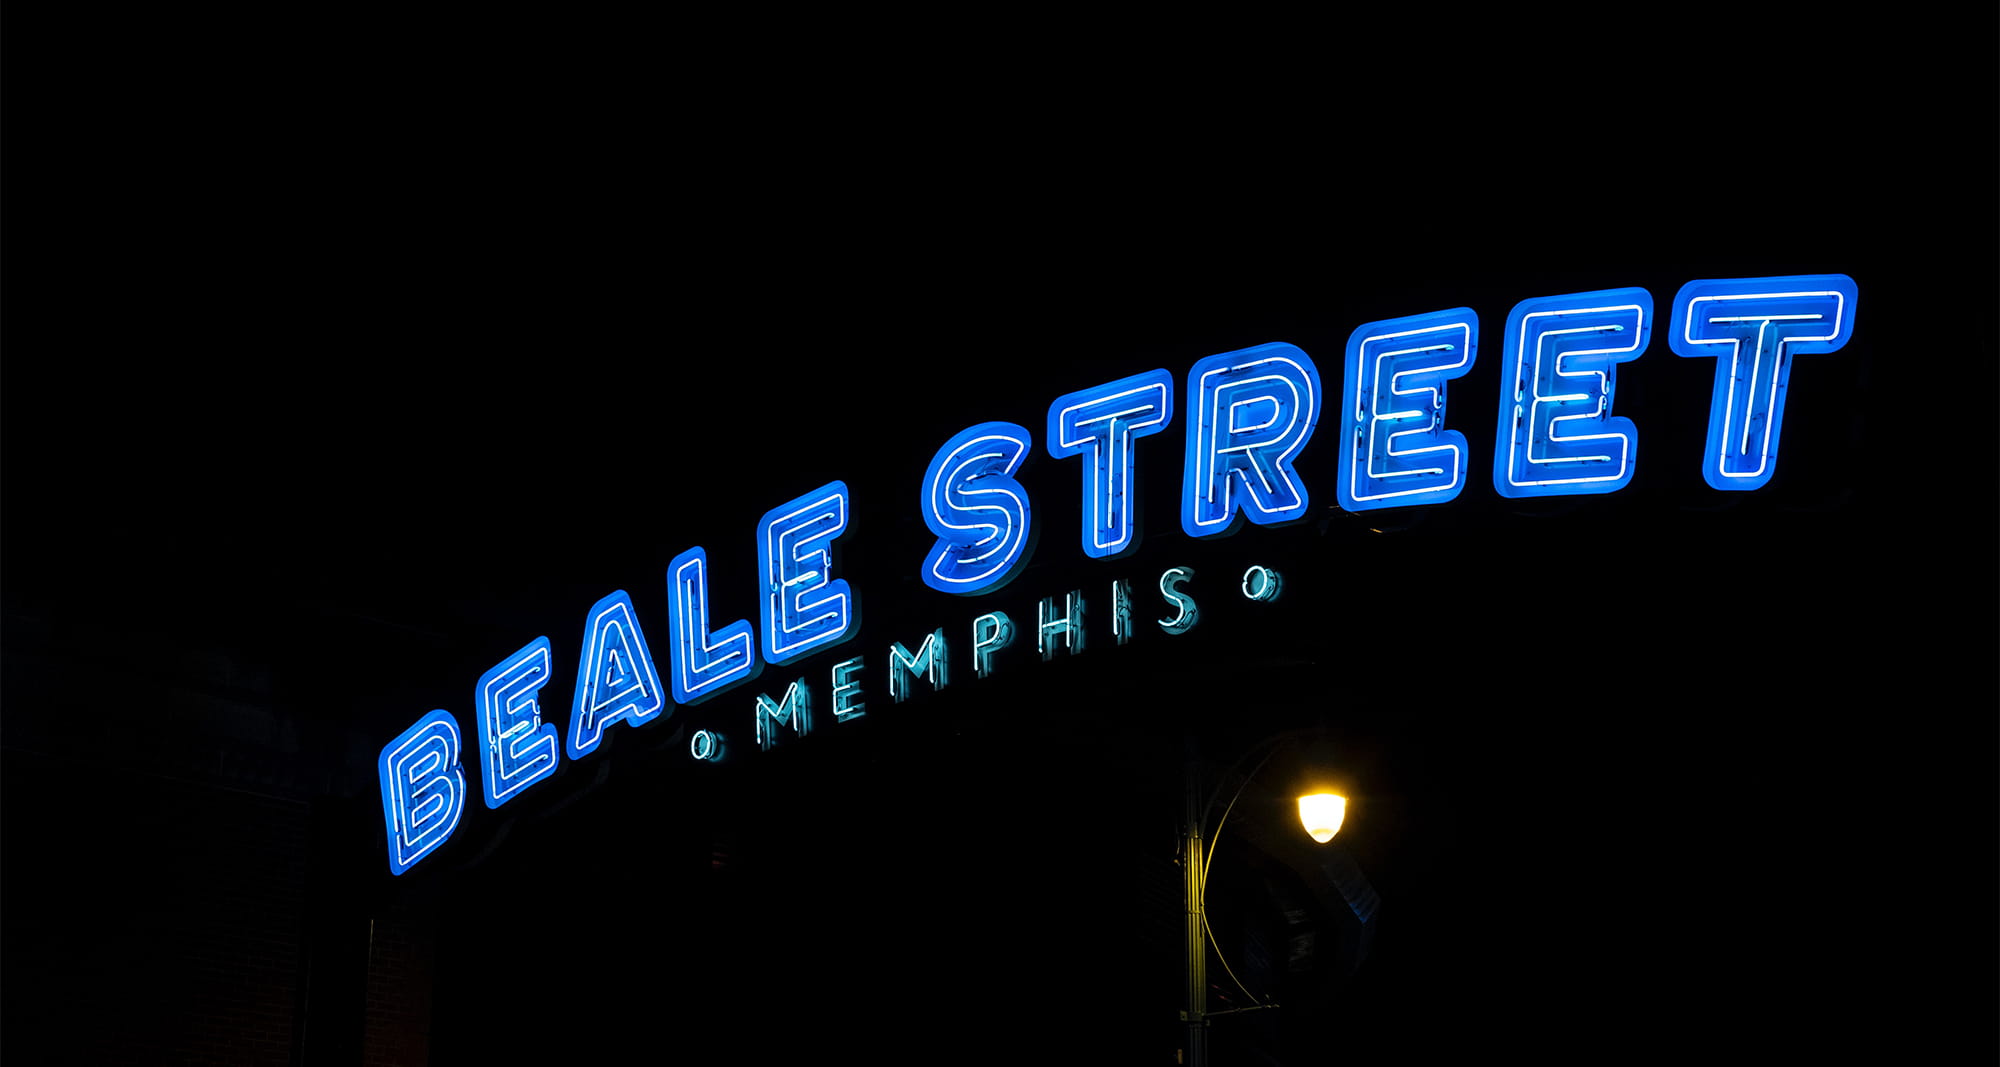 Beale Street, Memphis. Home of the Blues